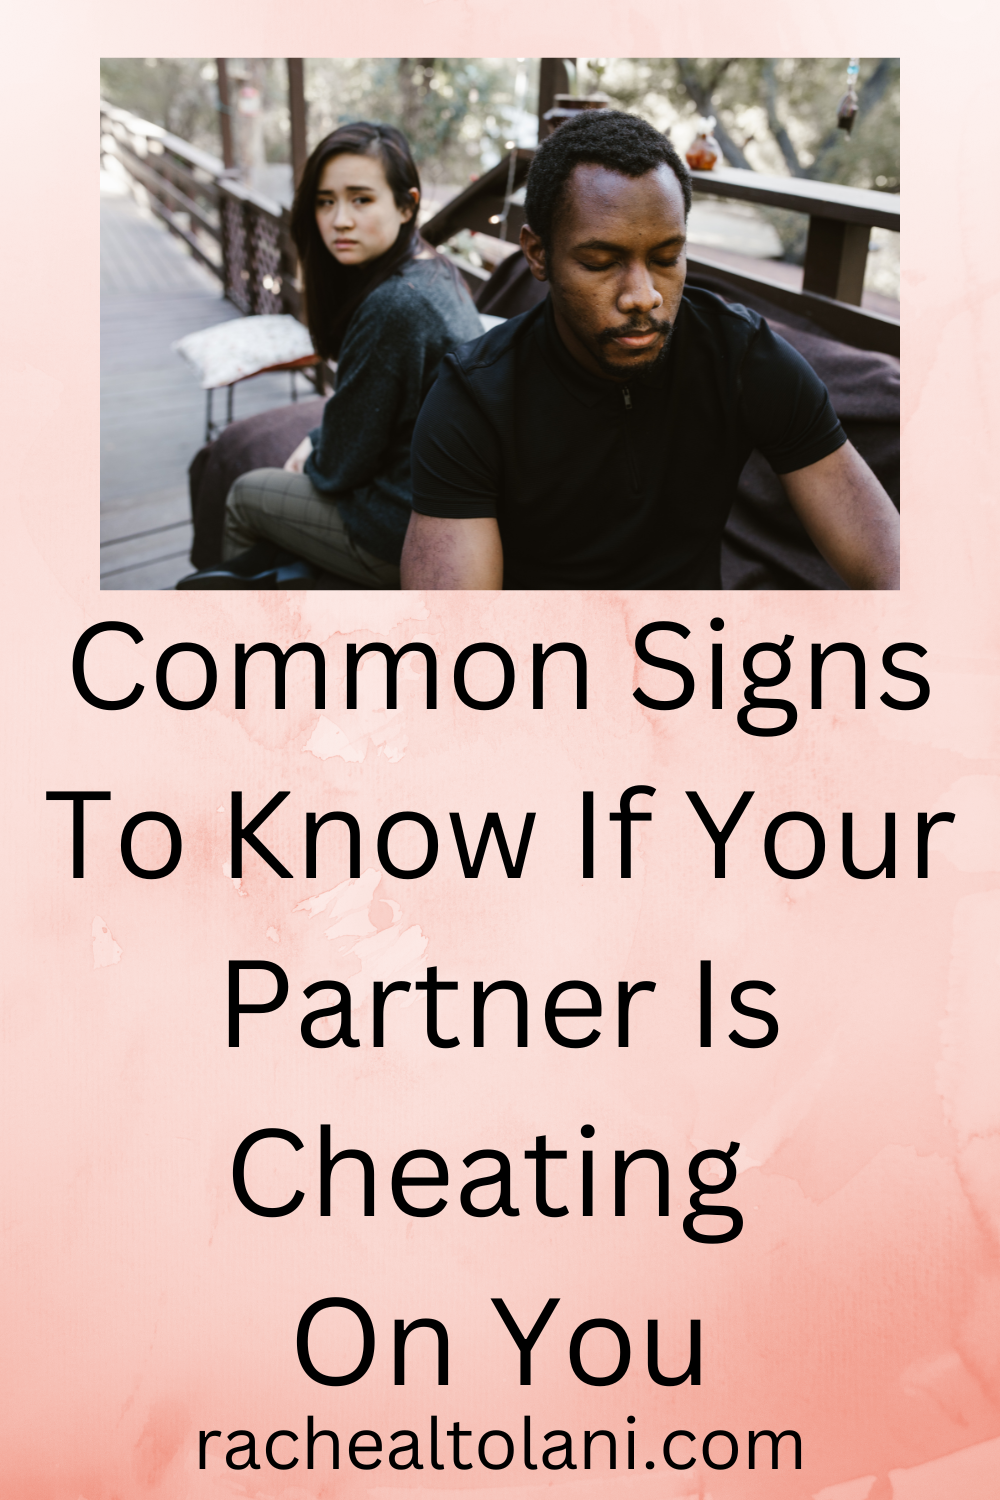 Signs to know if your partner is cheating on you